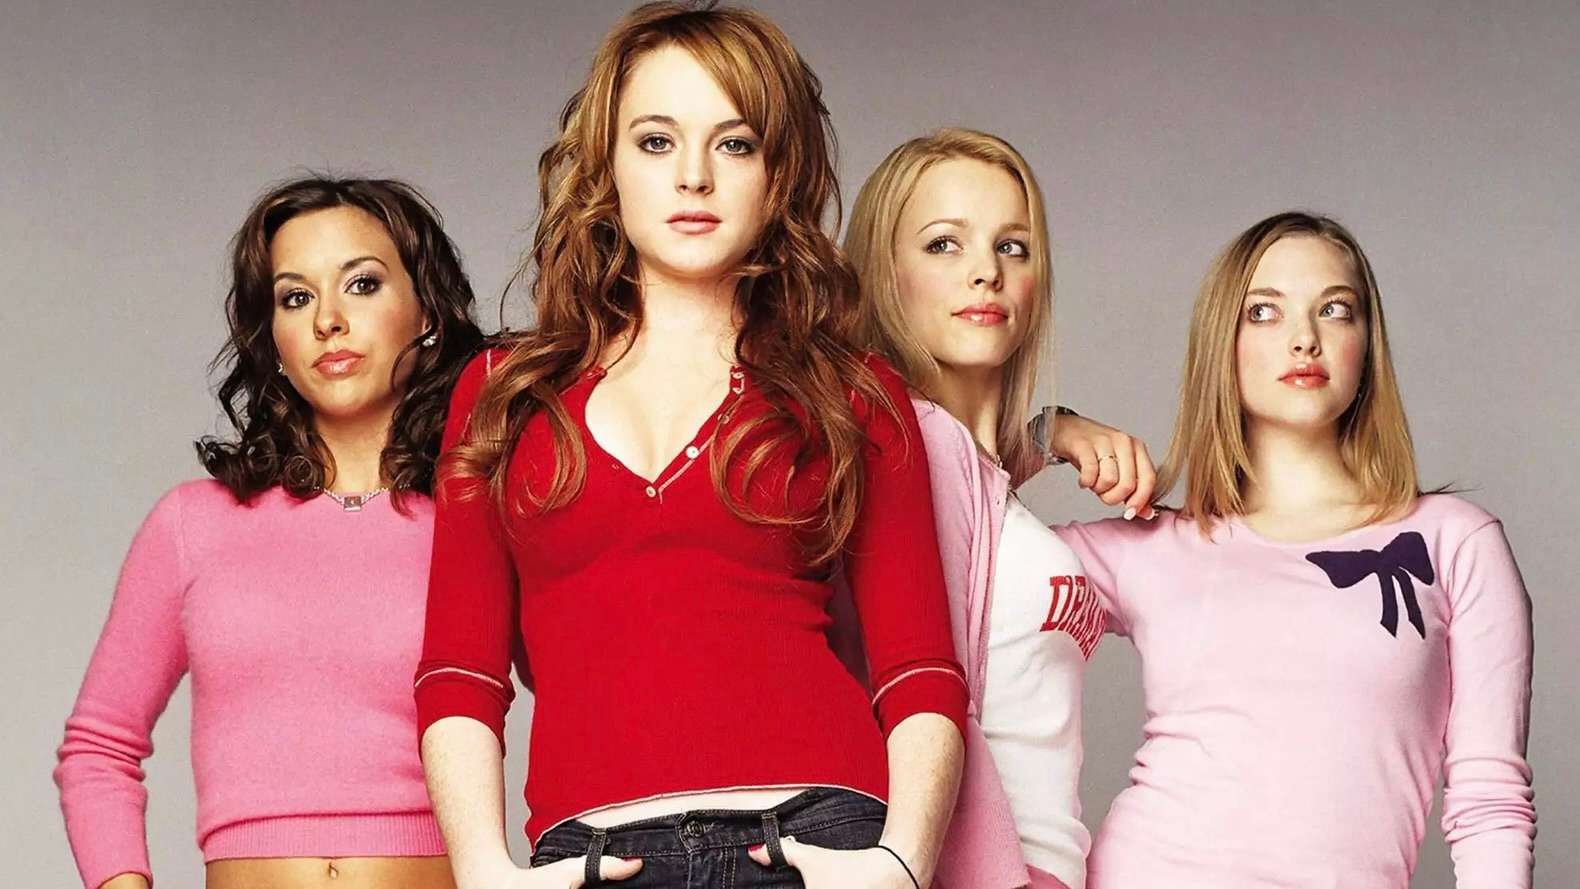 Lindsay Lohan with the Plastics in Mean Girls.